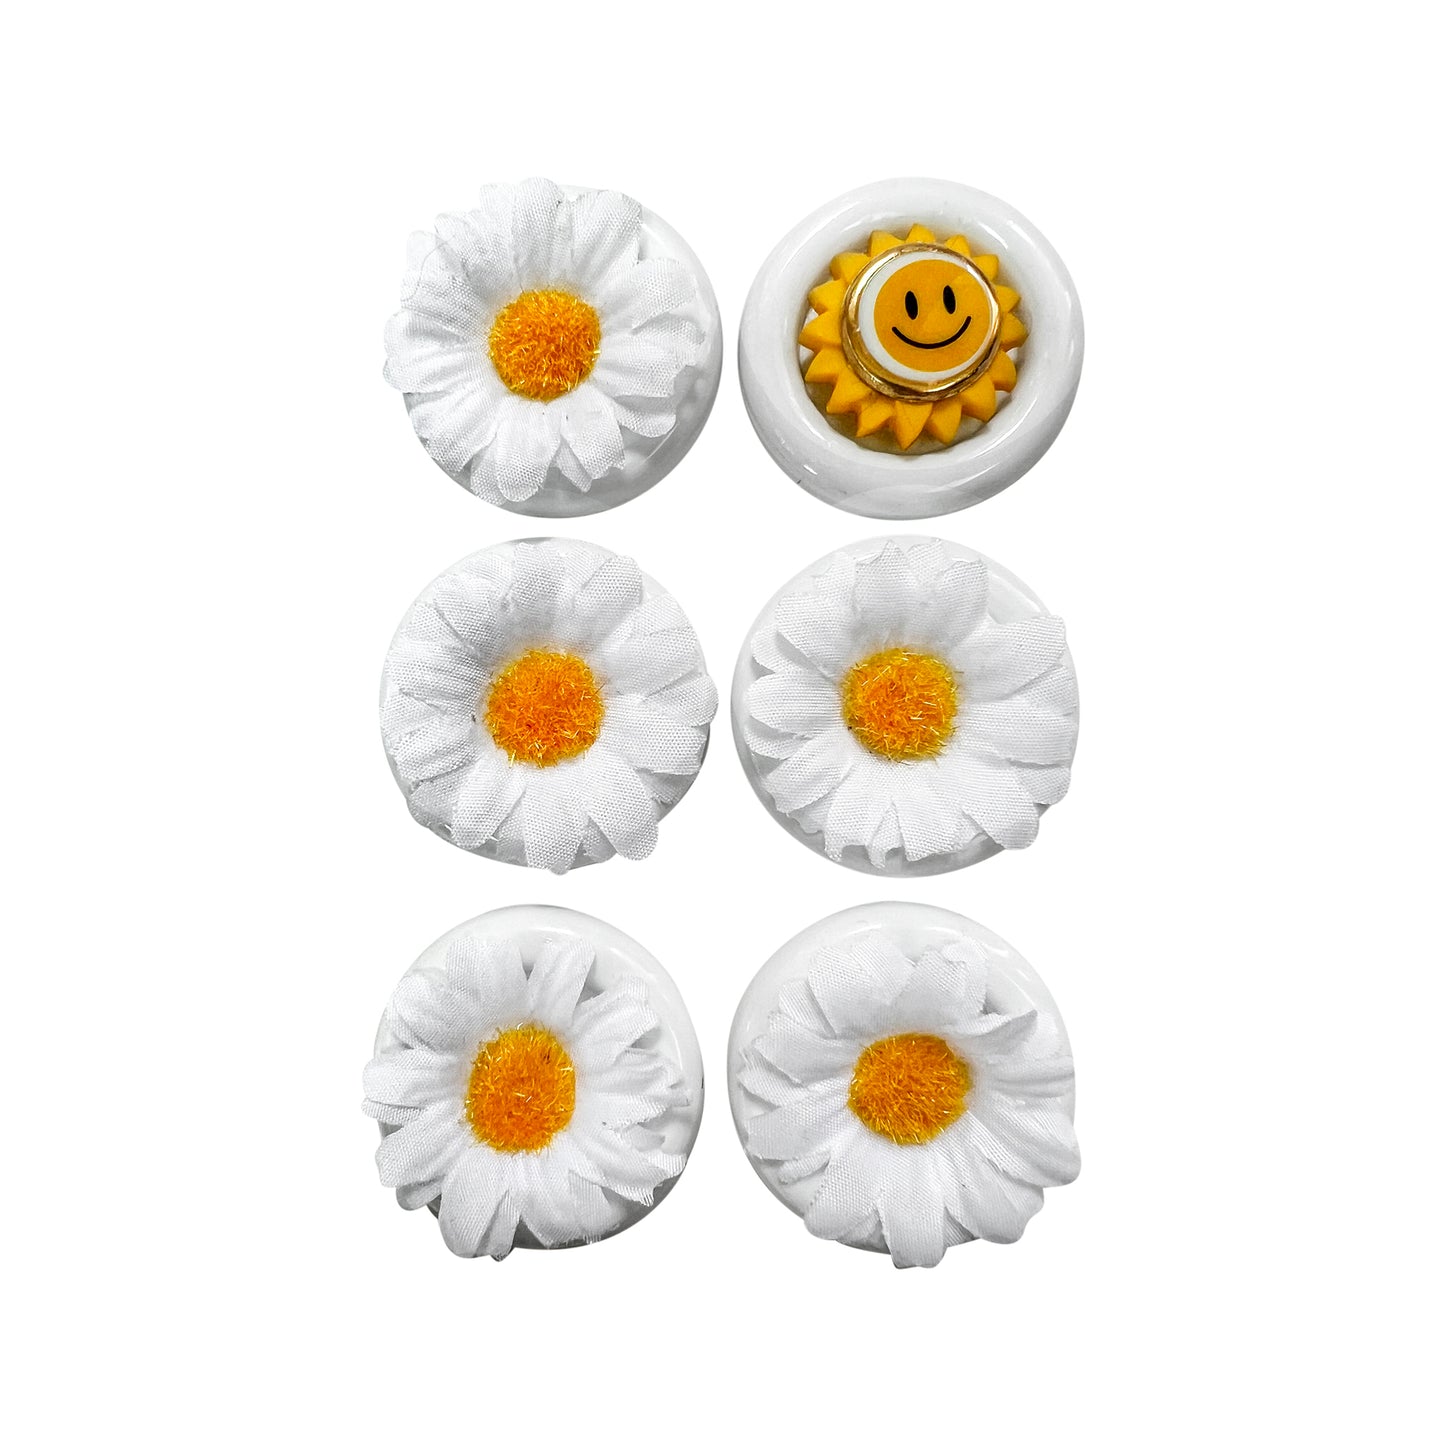 Glass Wrappings' set of 6 white buttons embellishments, 5 with white daisies atop and 1 with a gold smiley face.